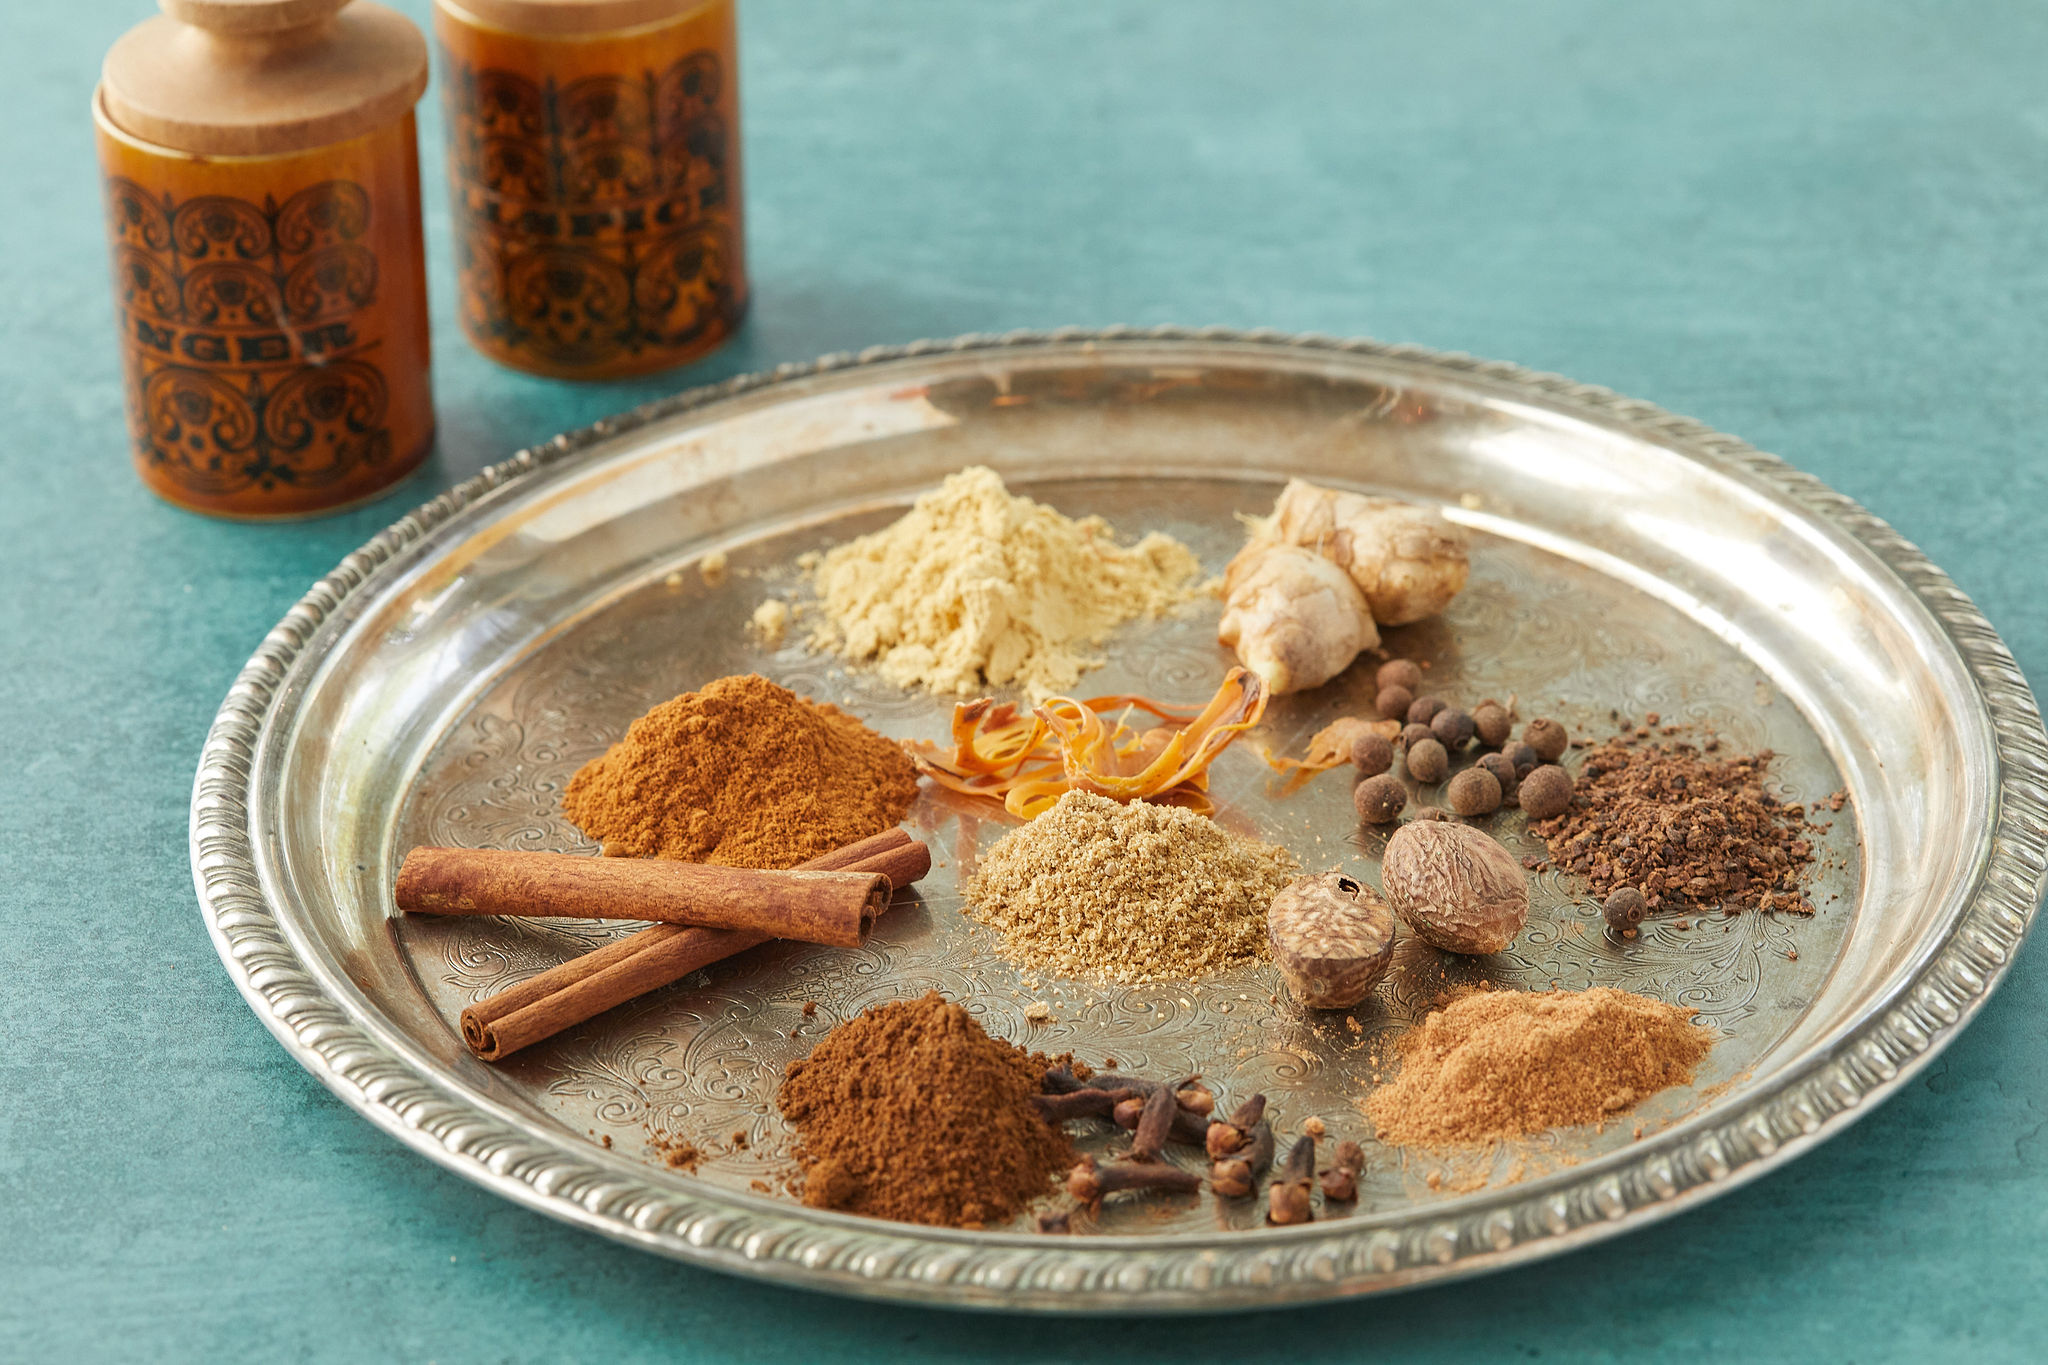 Spices for sweets - spice mix for baking, desserts, and everything